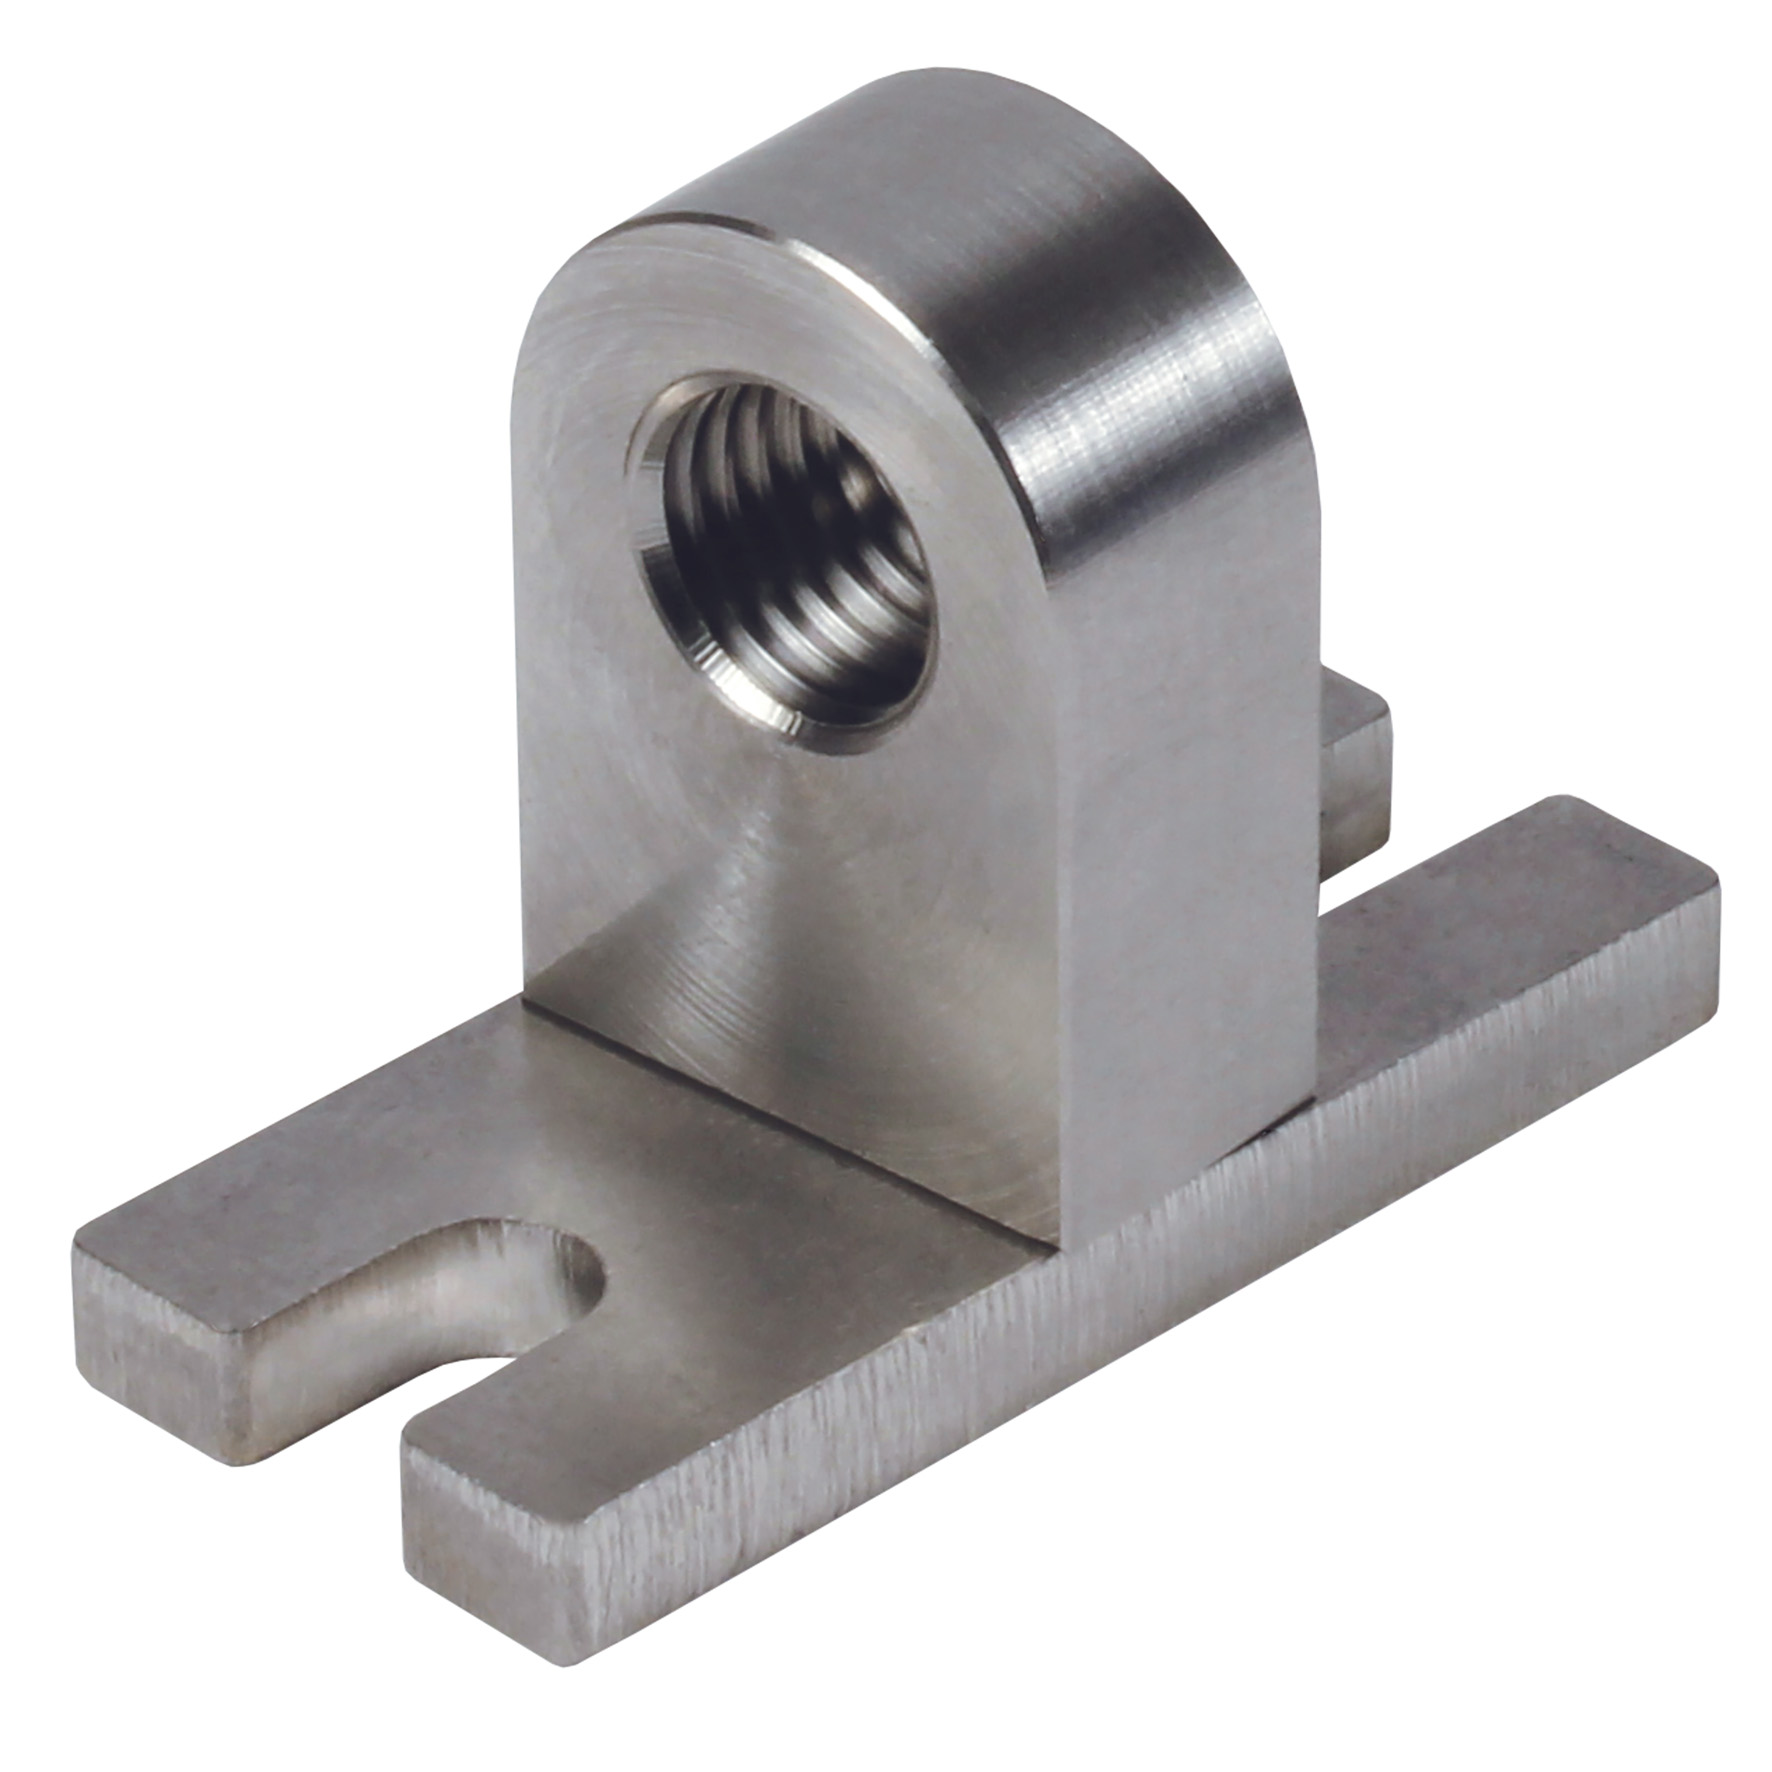 Universal 90°support clamp - Universal 90° support clamp - Stainless steel - 